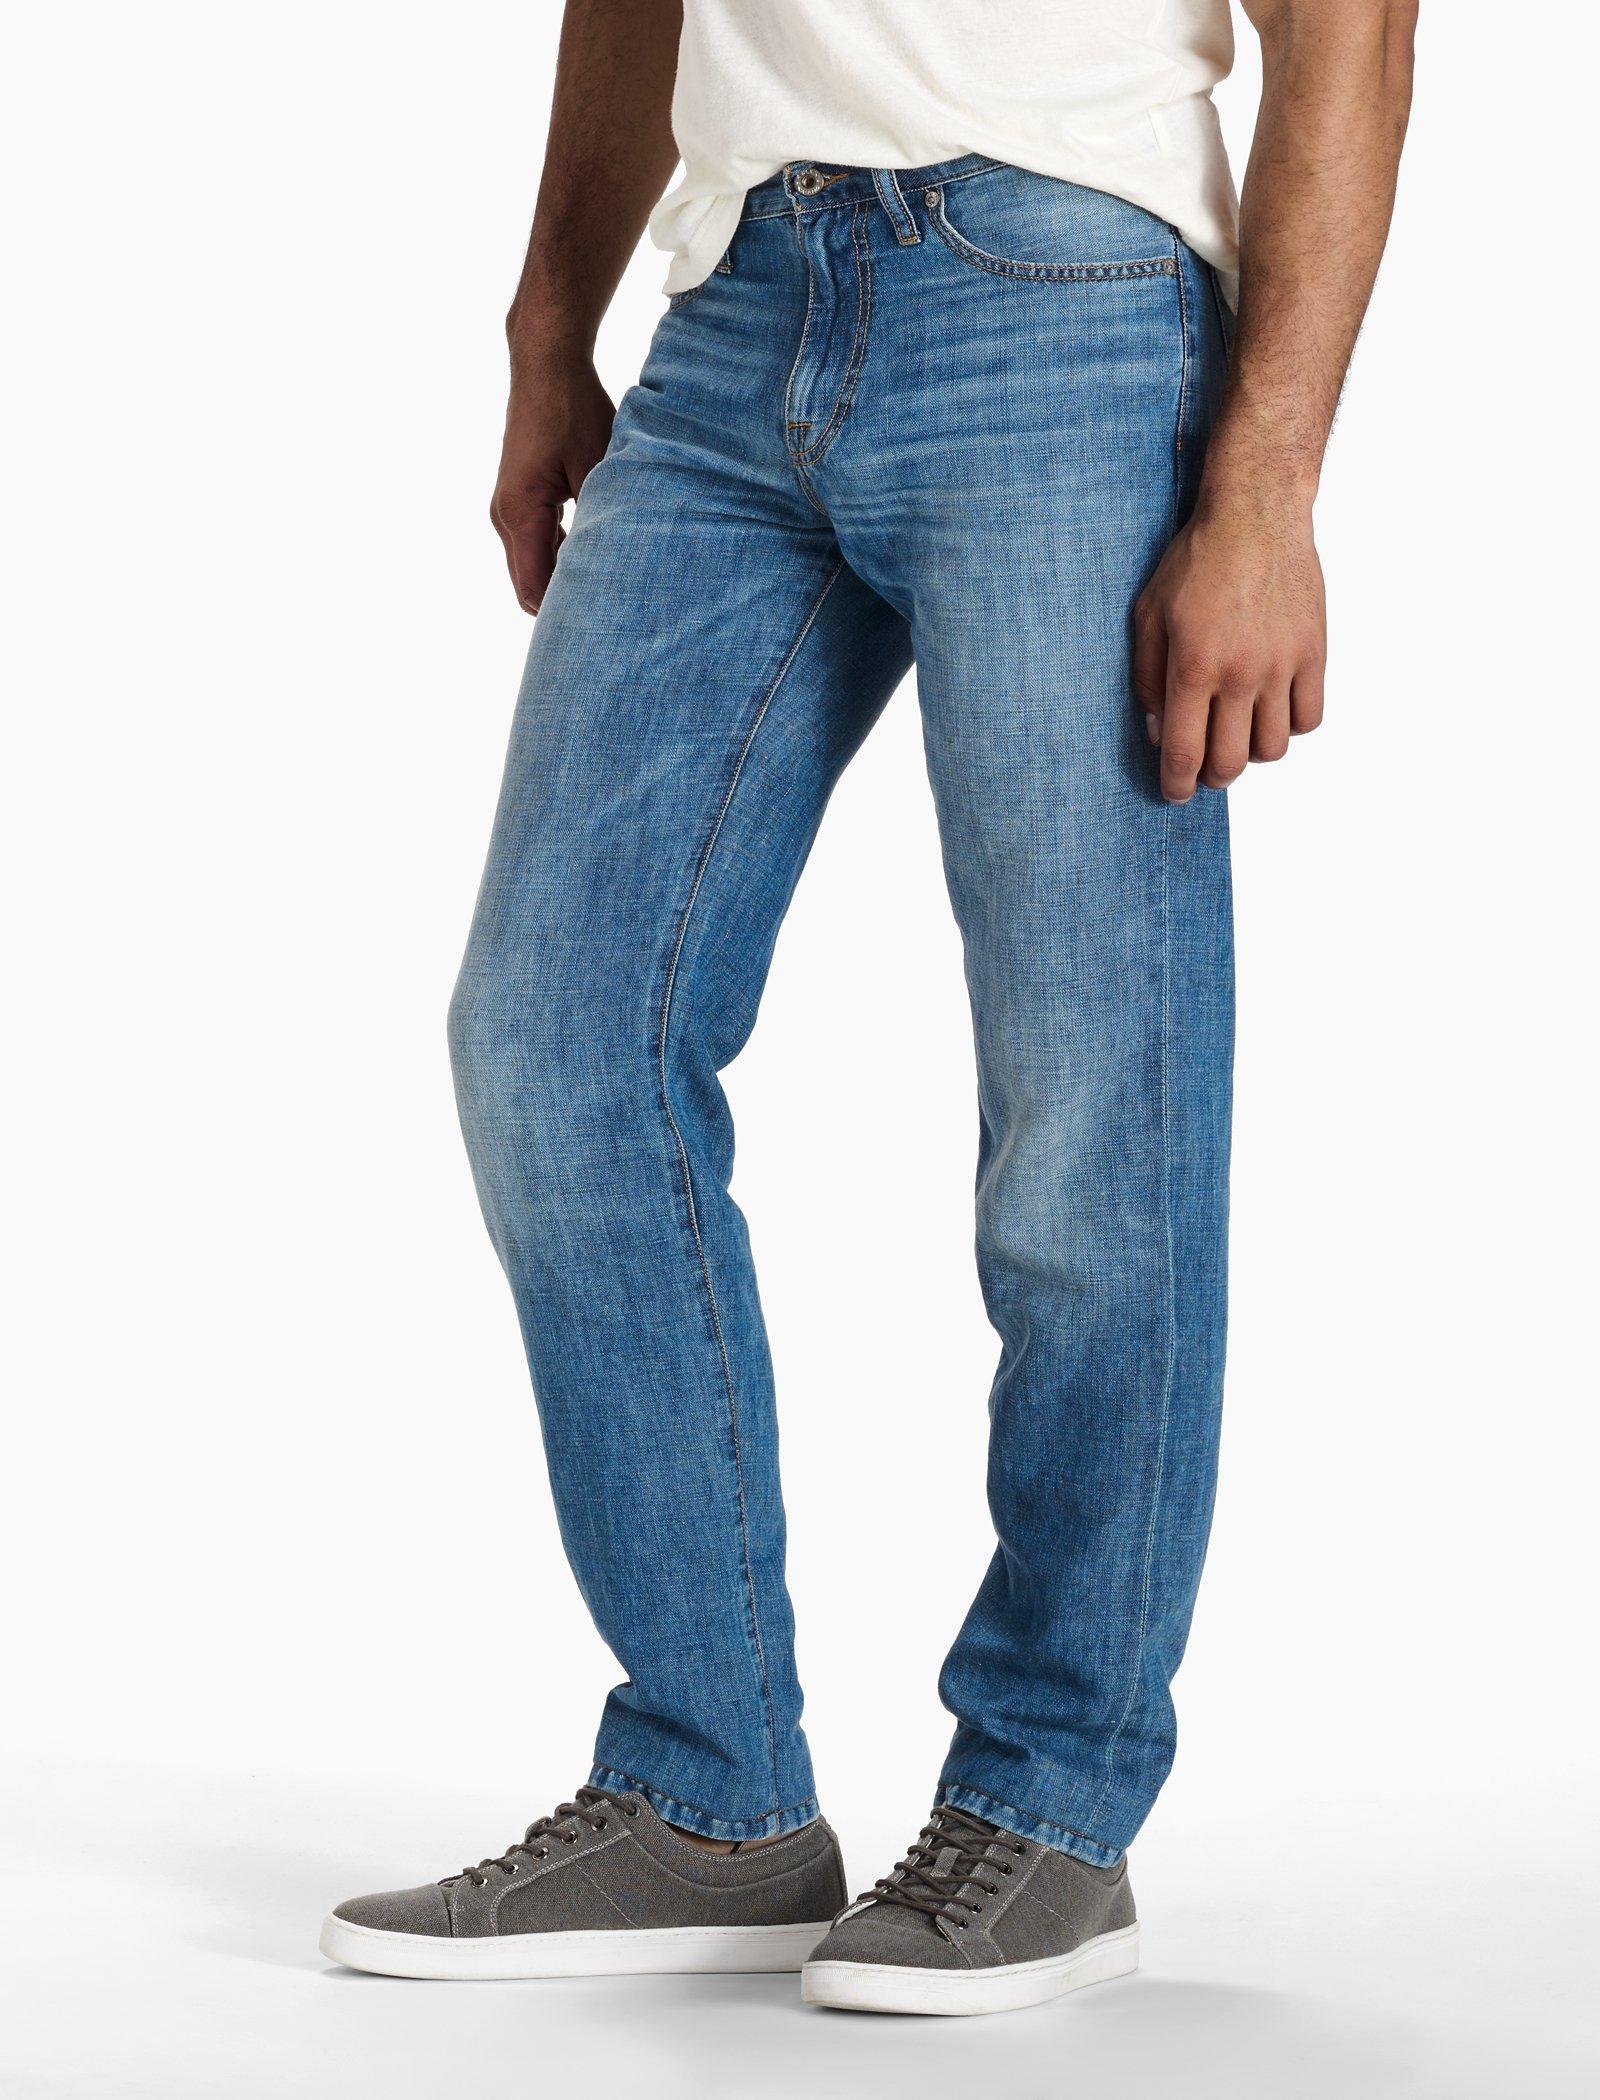 mens jeans types names